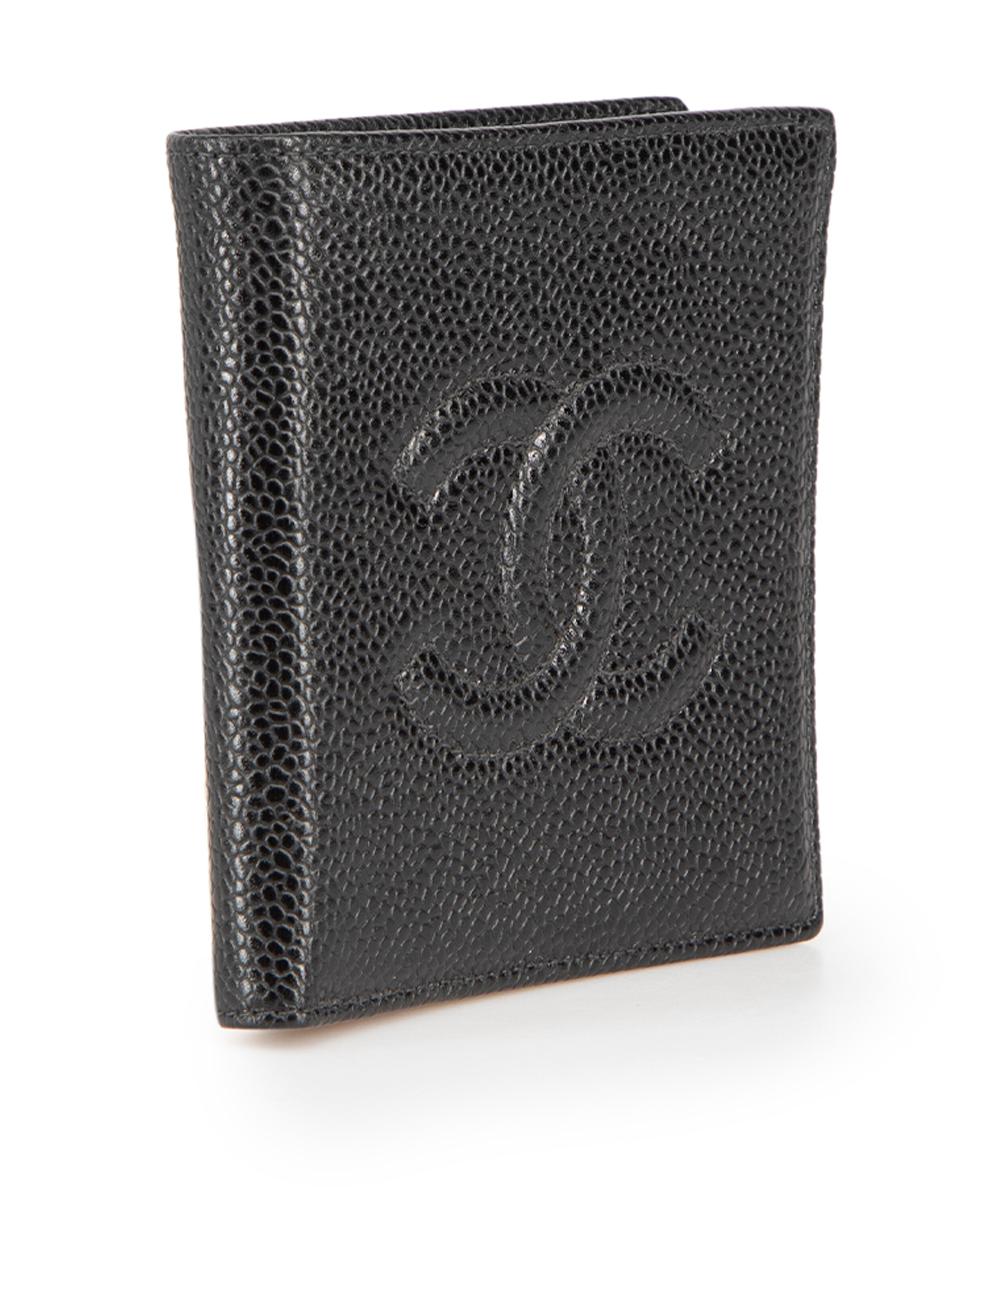 CONDITION is Very good. Minimal wear to wallet is evident. Minimal scratching to inner leather on this used Chanel designer resale item. This wallet comes with original box.
 
Details
Vintage
Black
Caviar leather
Wallet
'CC' Logo detail
Bifold
2x